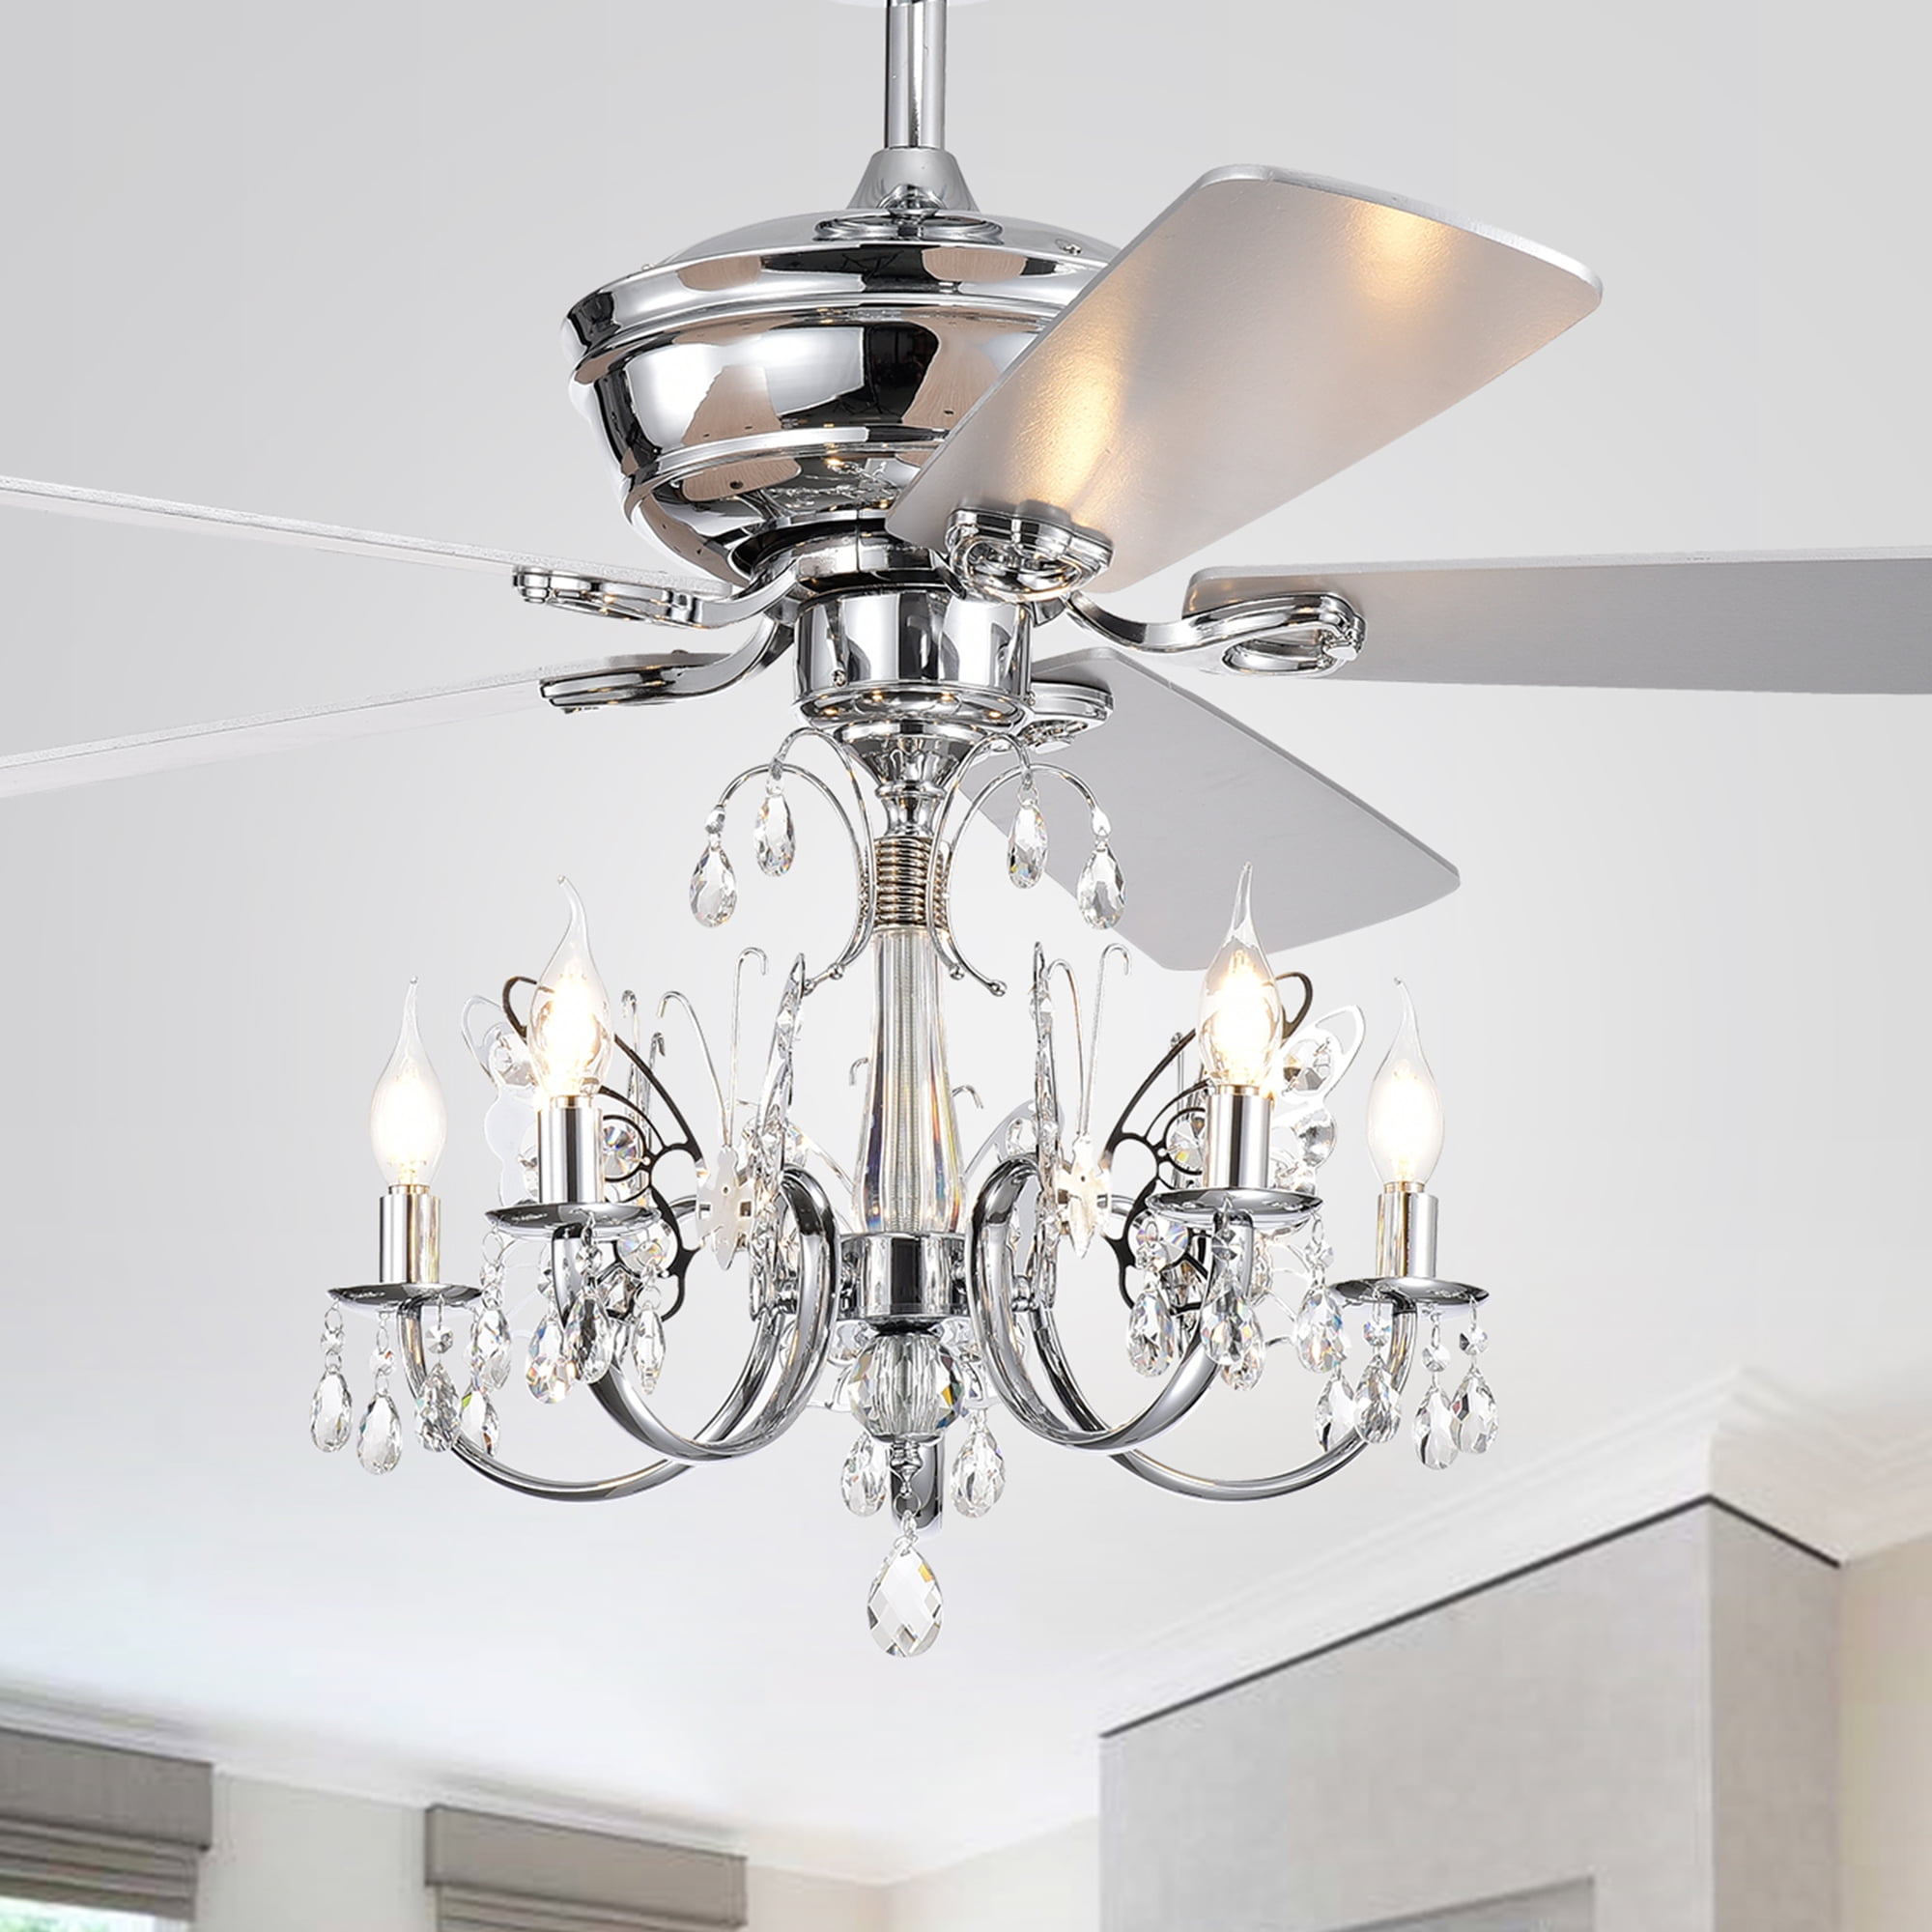 5 Light Chrome Lighted Ceiling Fan, Crystal Chandelier Ceiling Fan With Remote